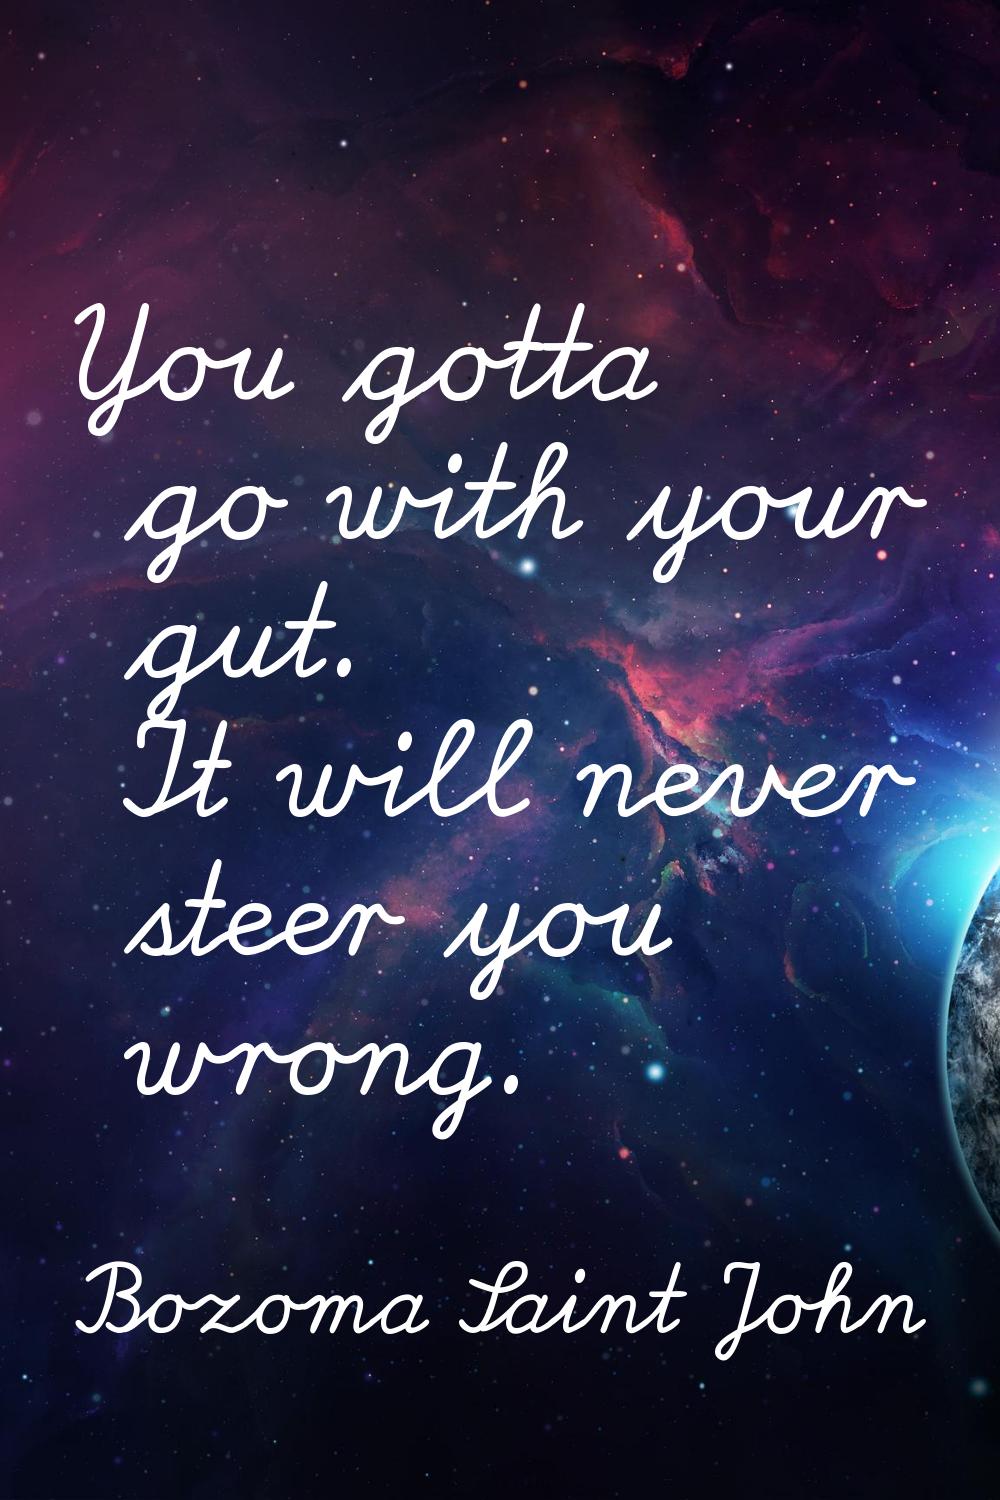 You gotta go with your gut. It will never steer you wrong.